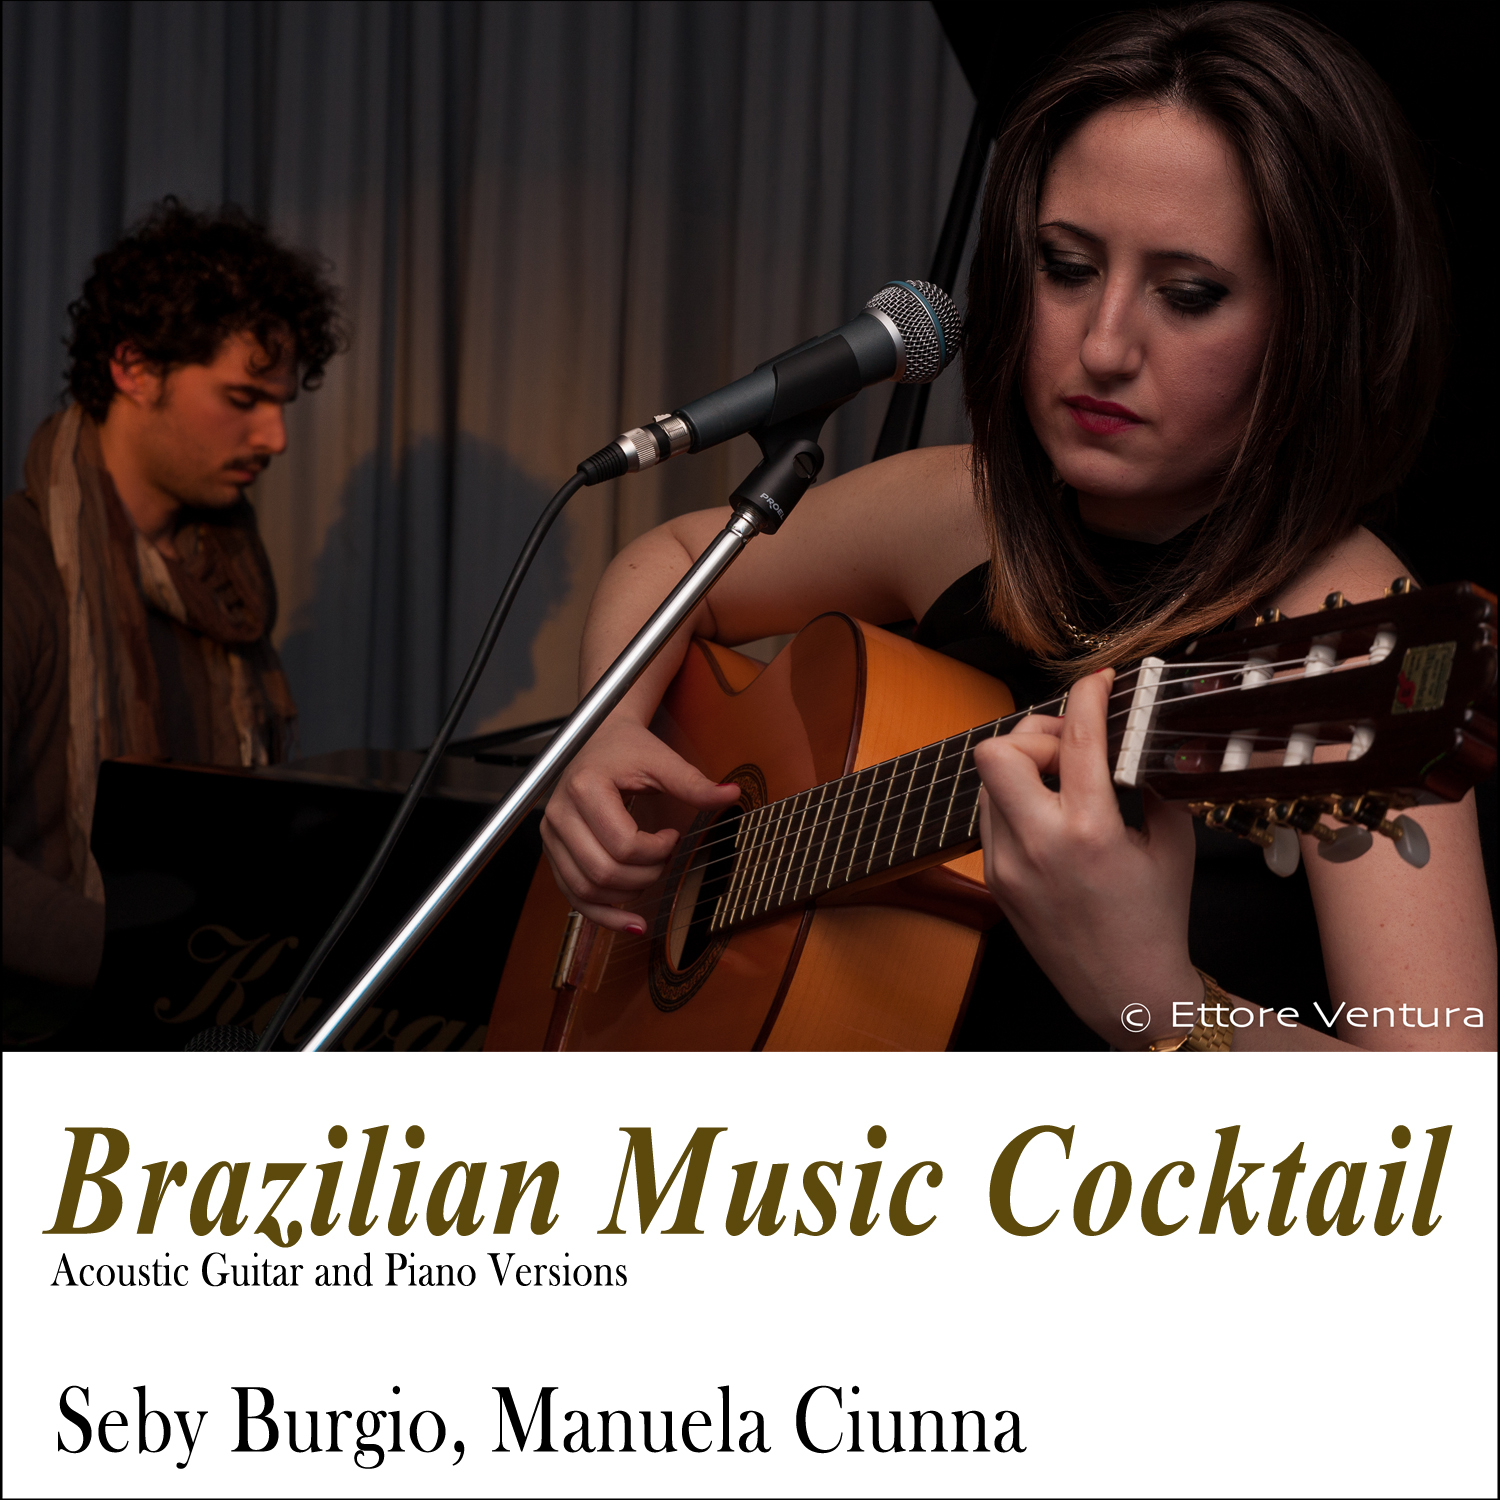 Brazilian Music Cocktail Acoustic Guitar and Piano Versions